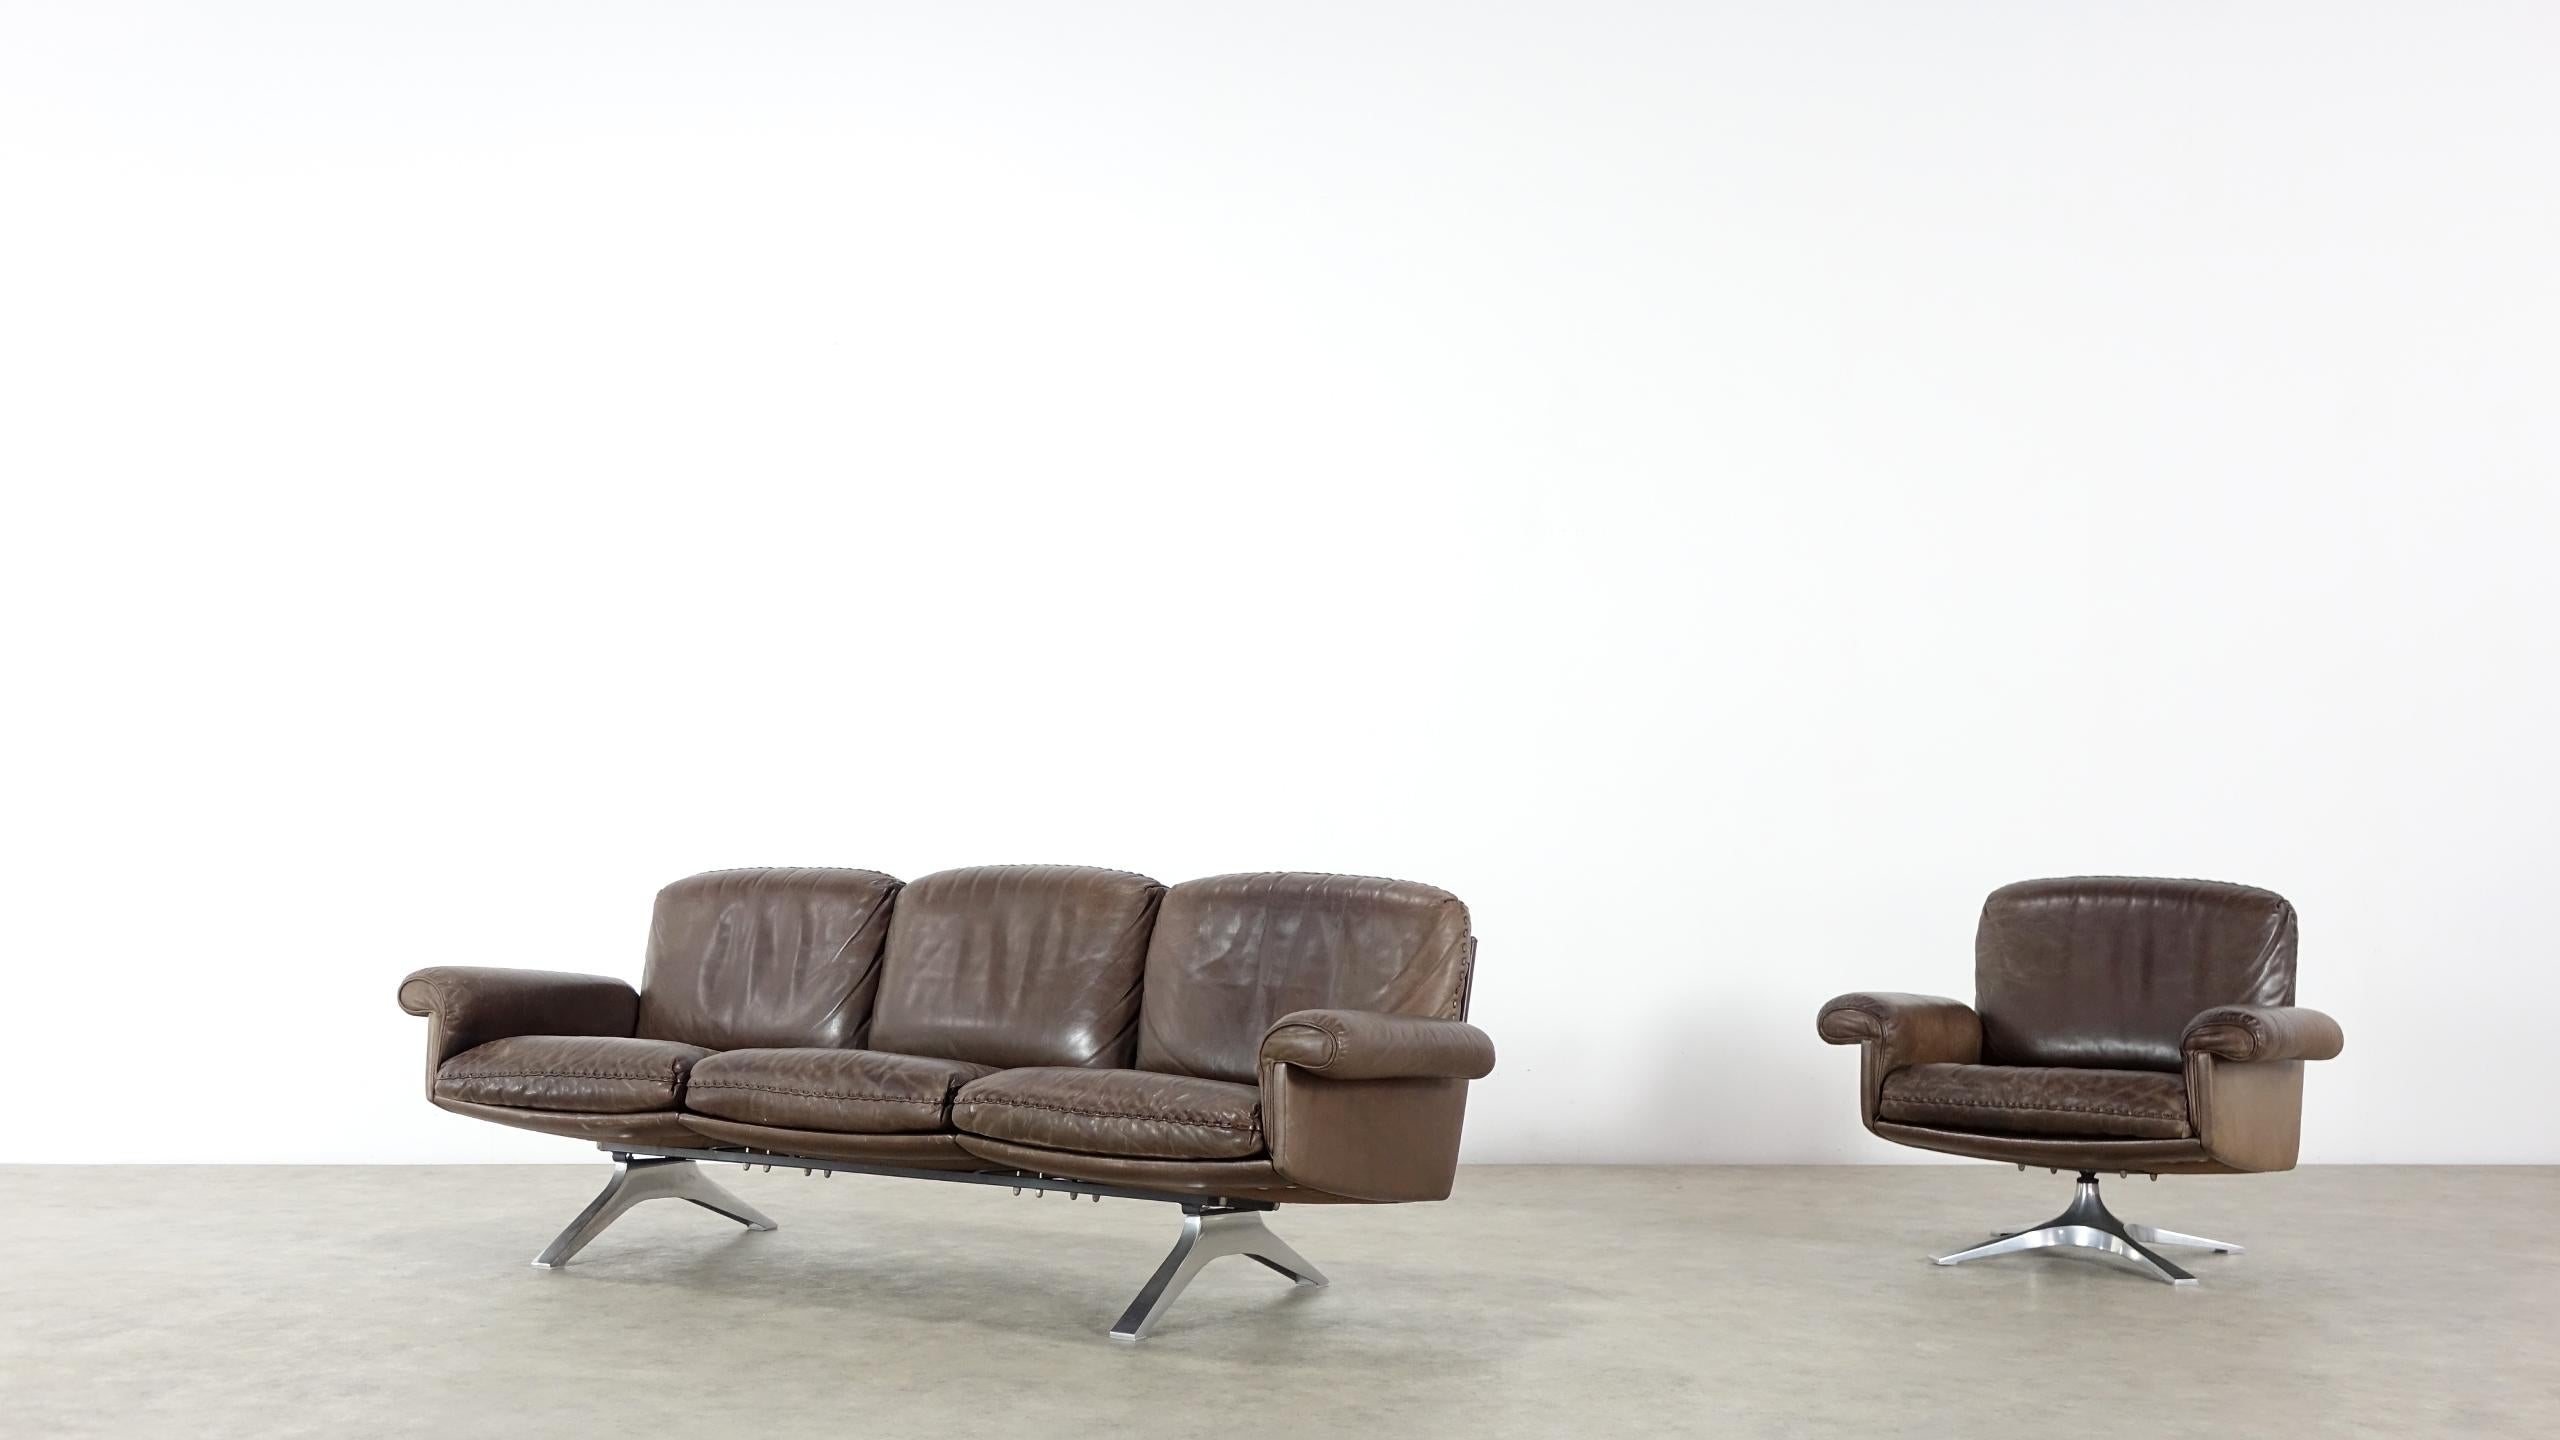 Swiss De Sede DS 31 Set of a Swivel Armchair and a Three-Seat Sofa from Switzerland